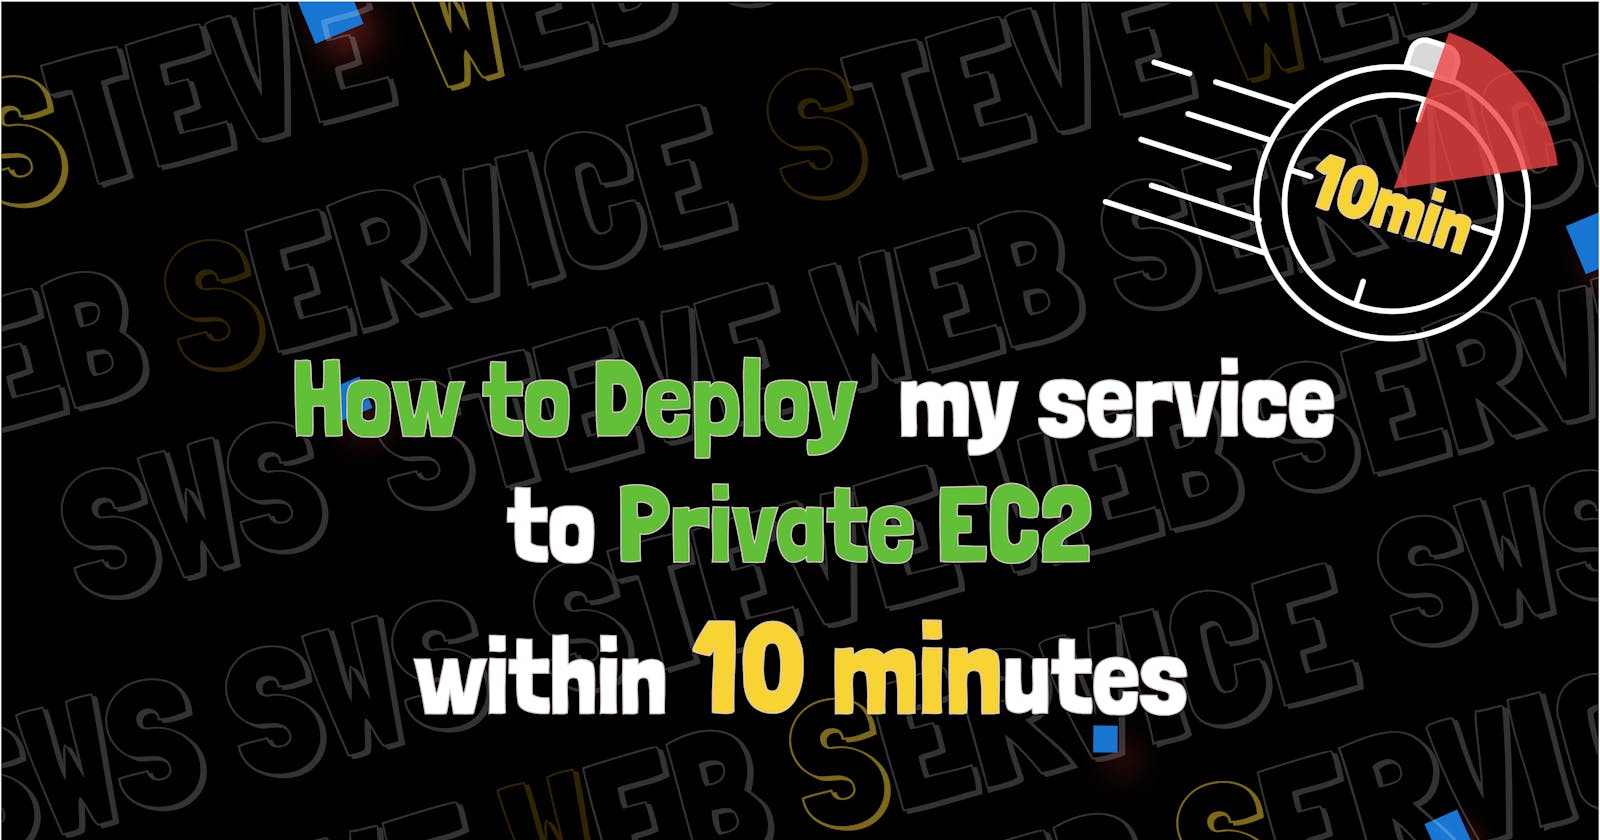 SWS Console: Deploying my service to Private EC2 within 10 minutes.